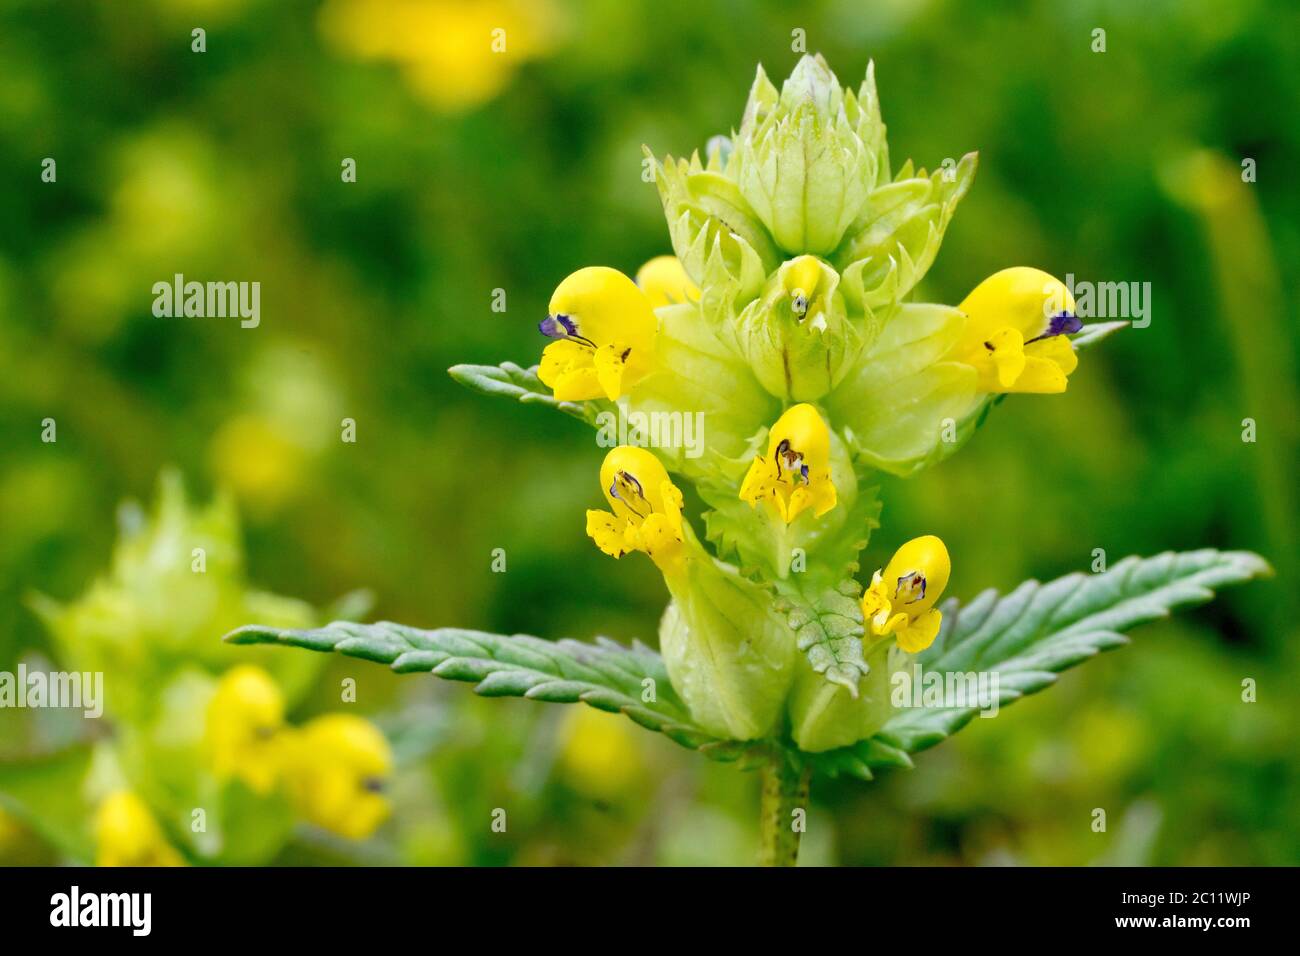 Yellow Rattle (rhinanthus minor), close up showing the flowers and leaves of the plant. Stock Photo